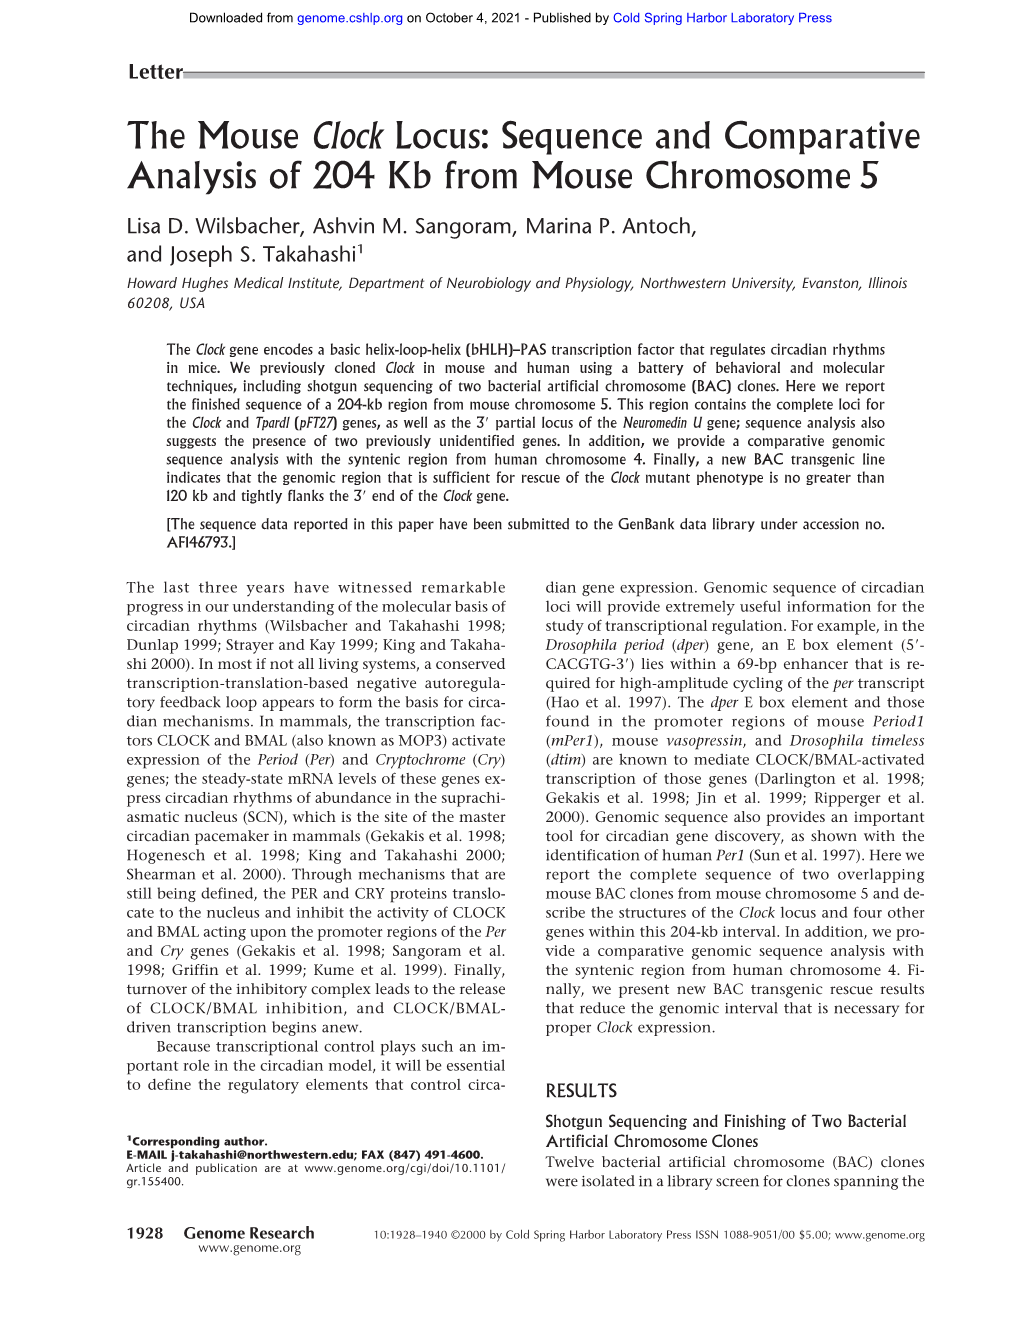 Sequence and Comparative Analysis of 204 Kb from Mouse Chromosome 5